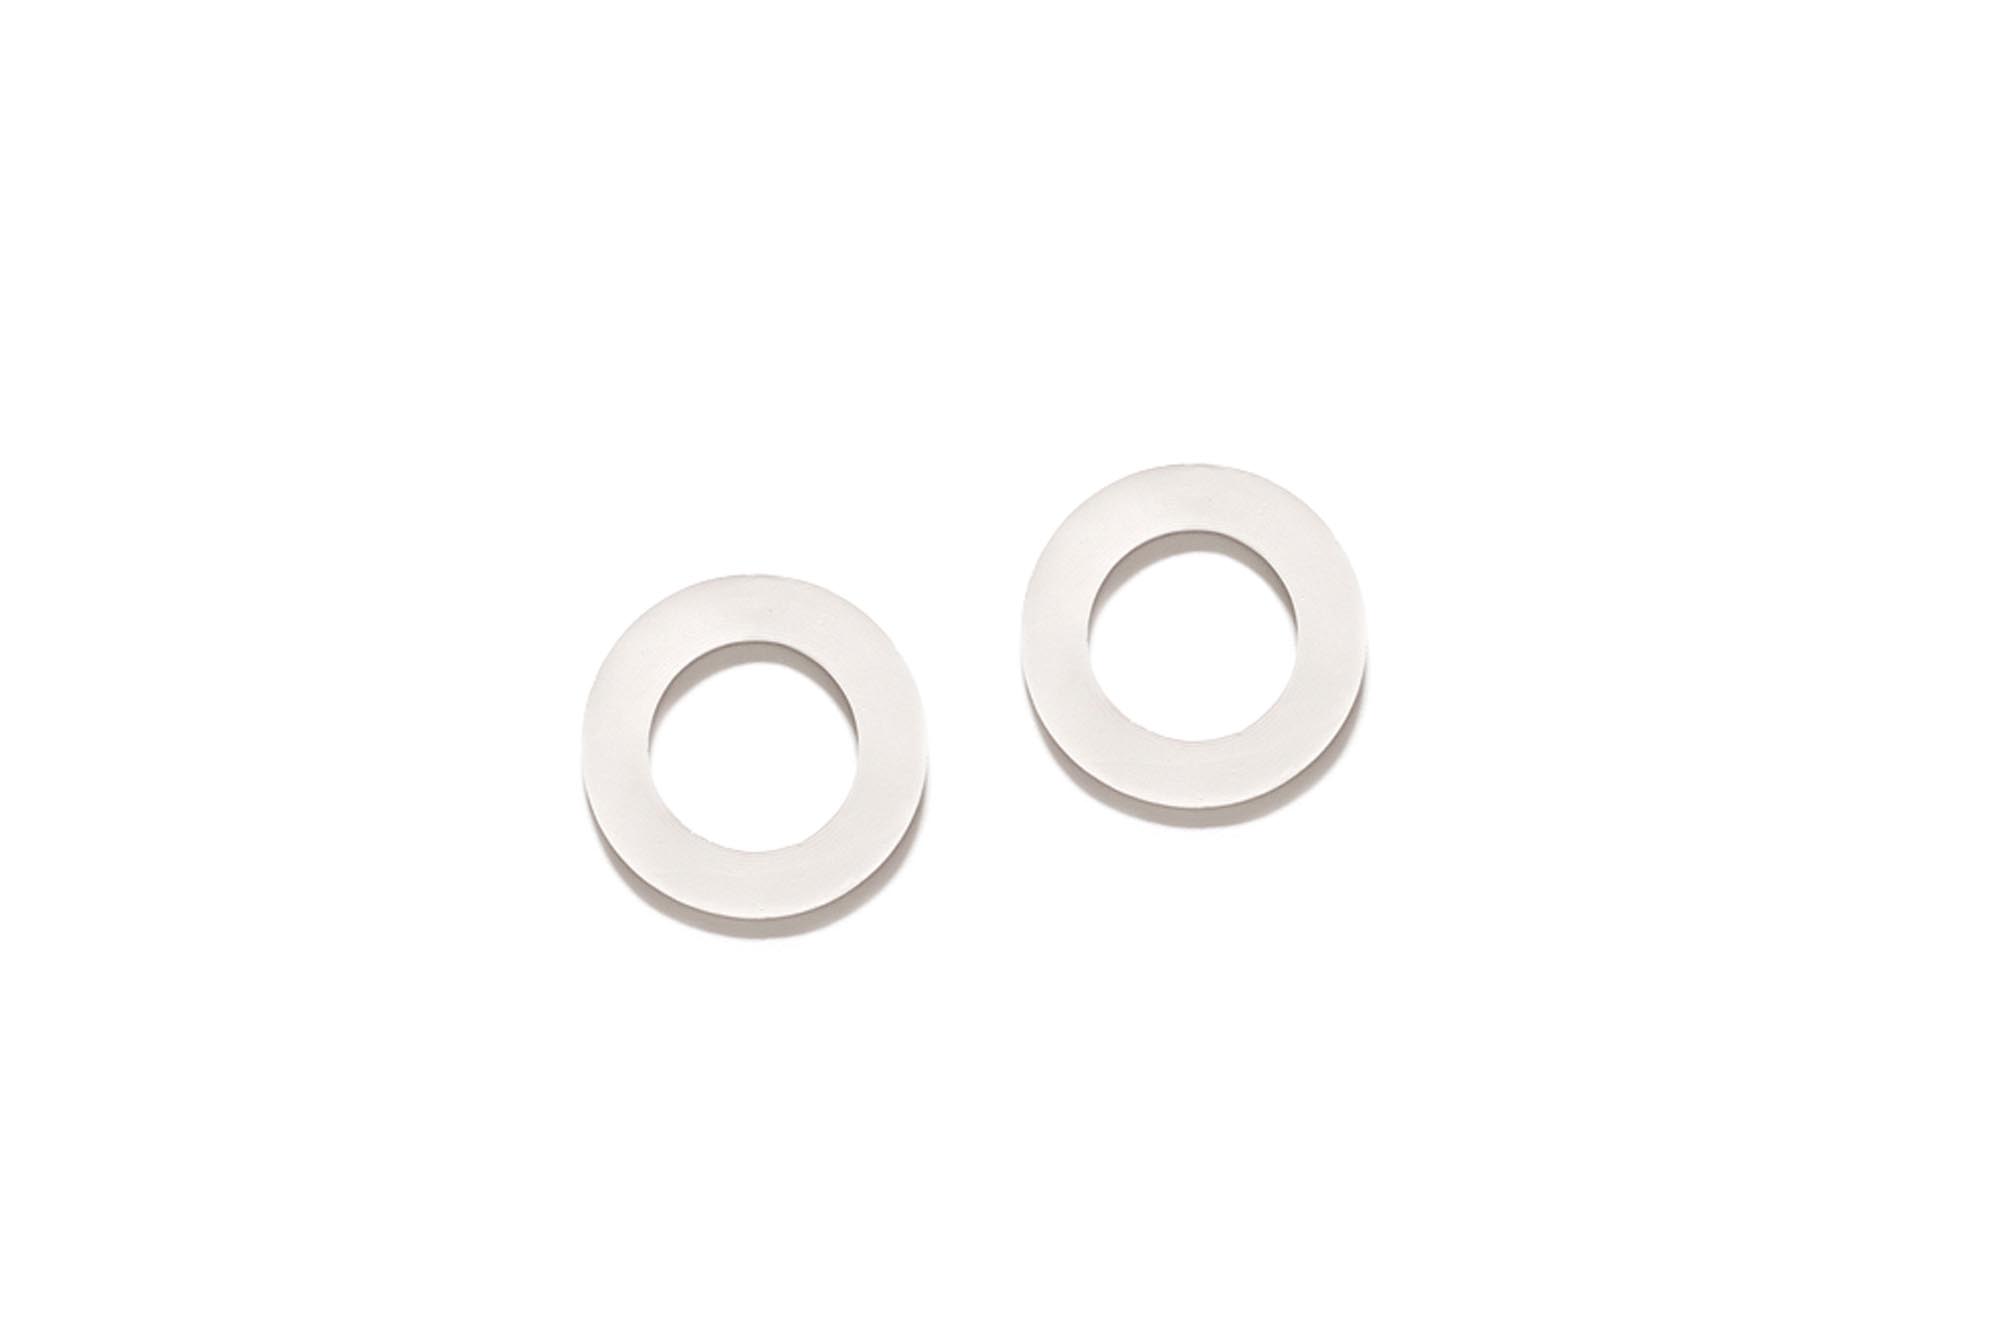 Photo of SodaStream adapter seal / washer.